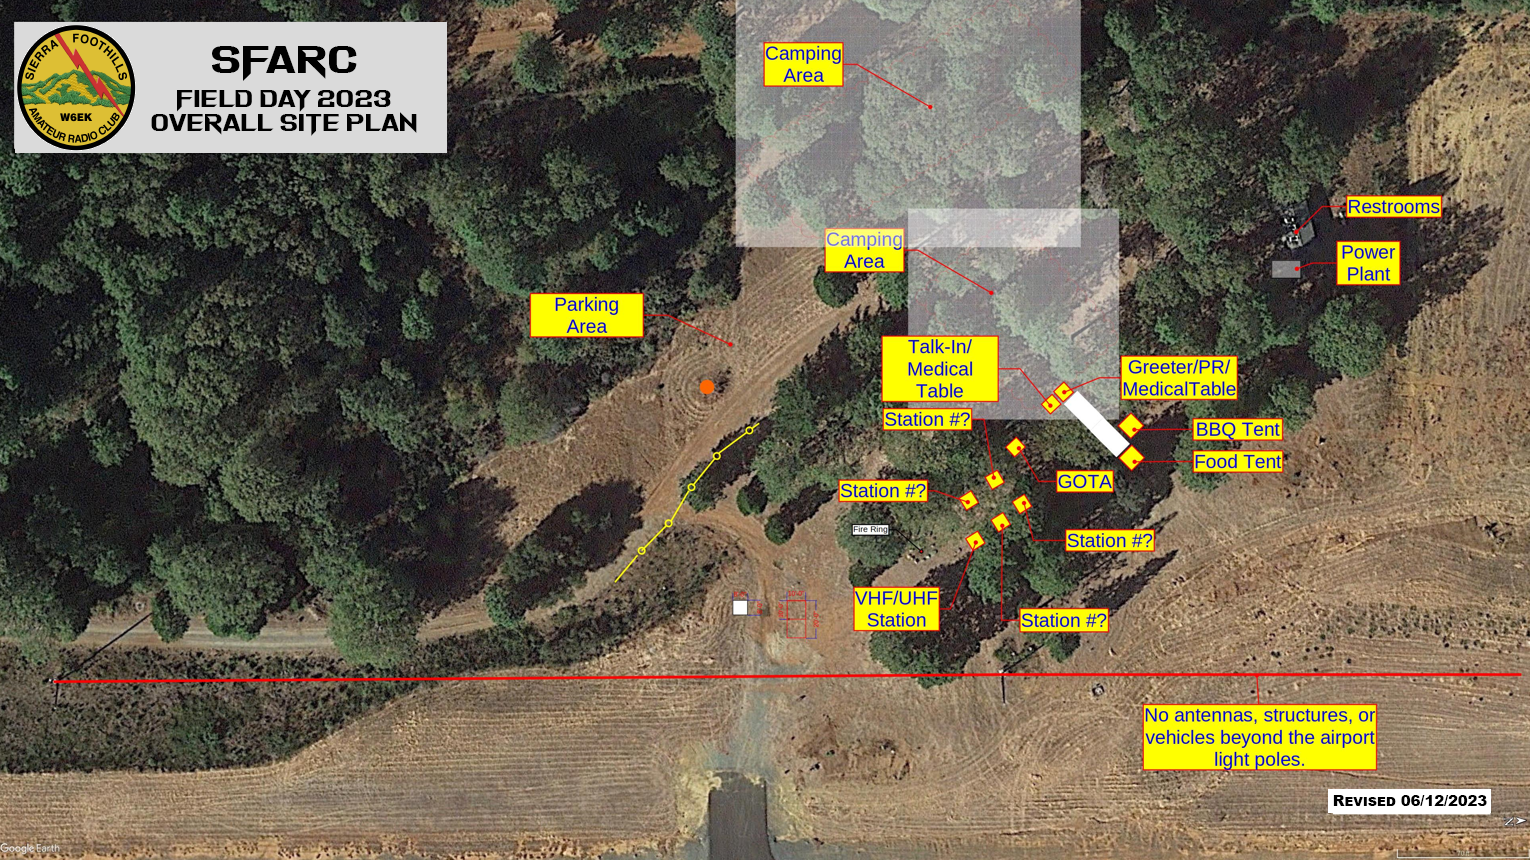 SFARC Field Day Overall Detailed Site Plan